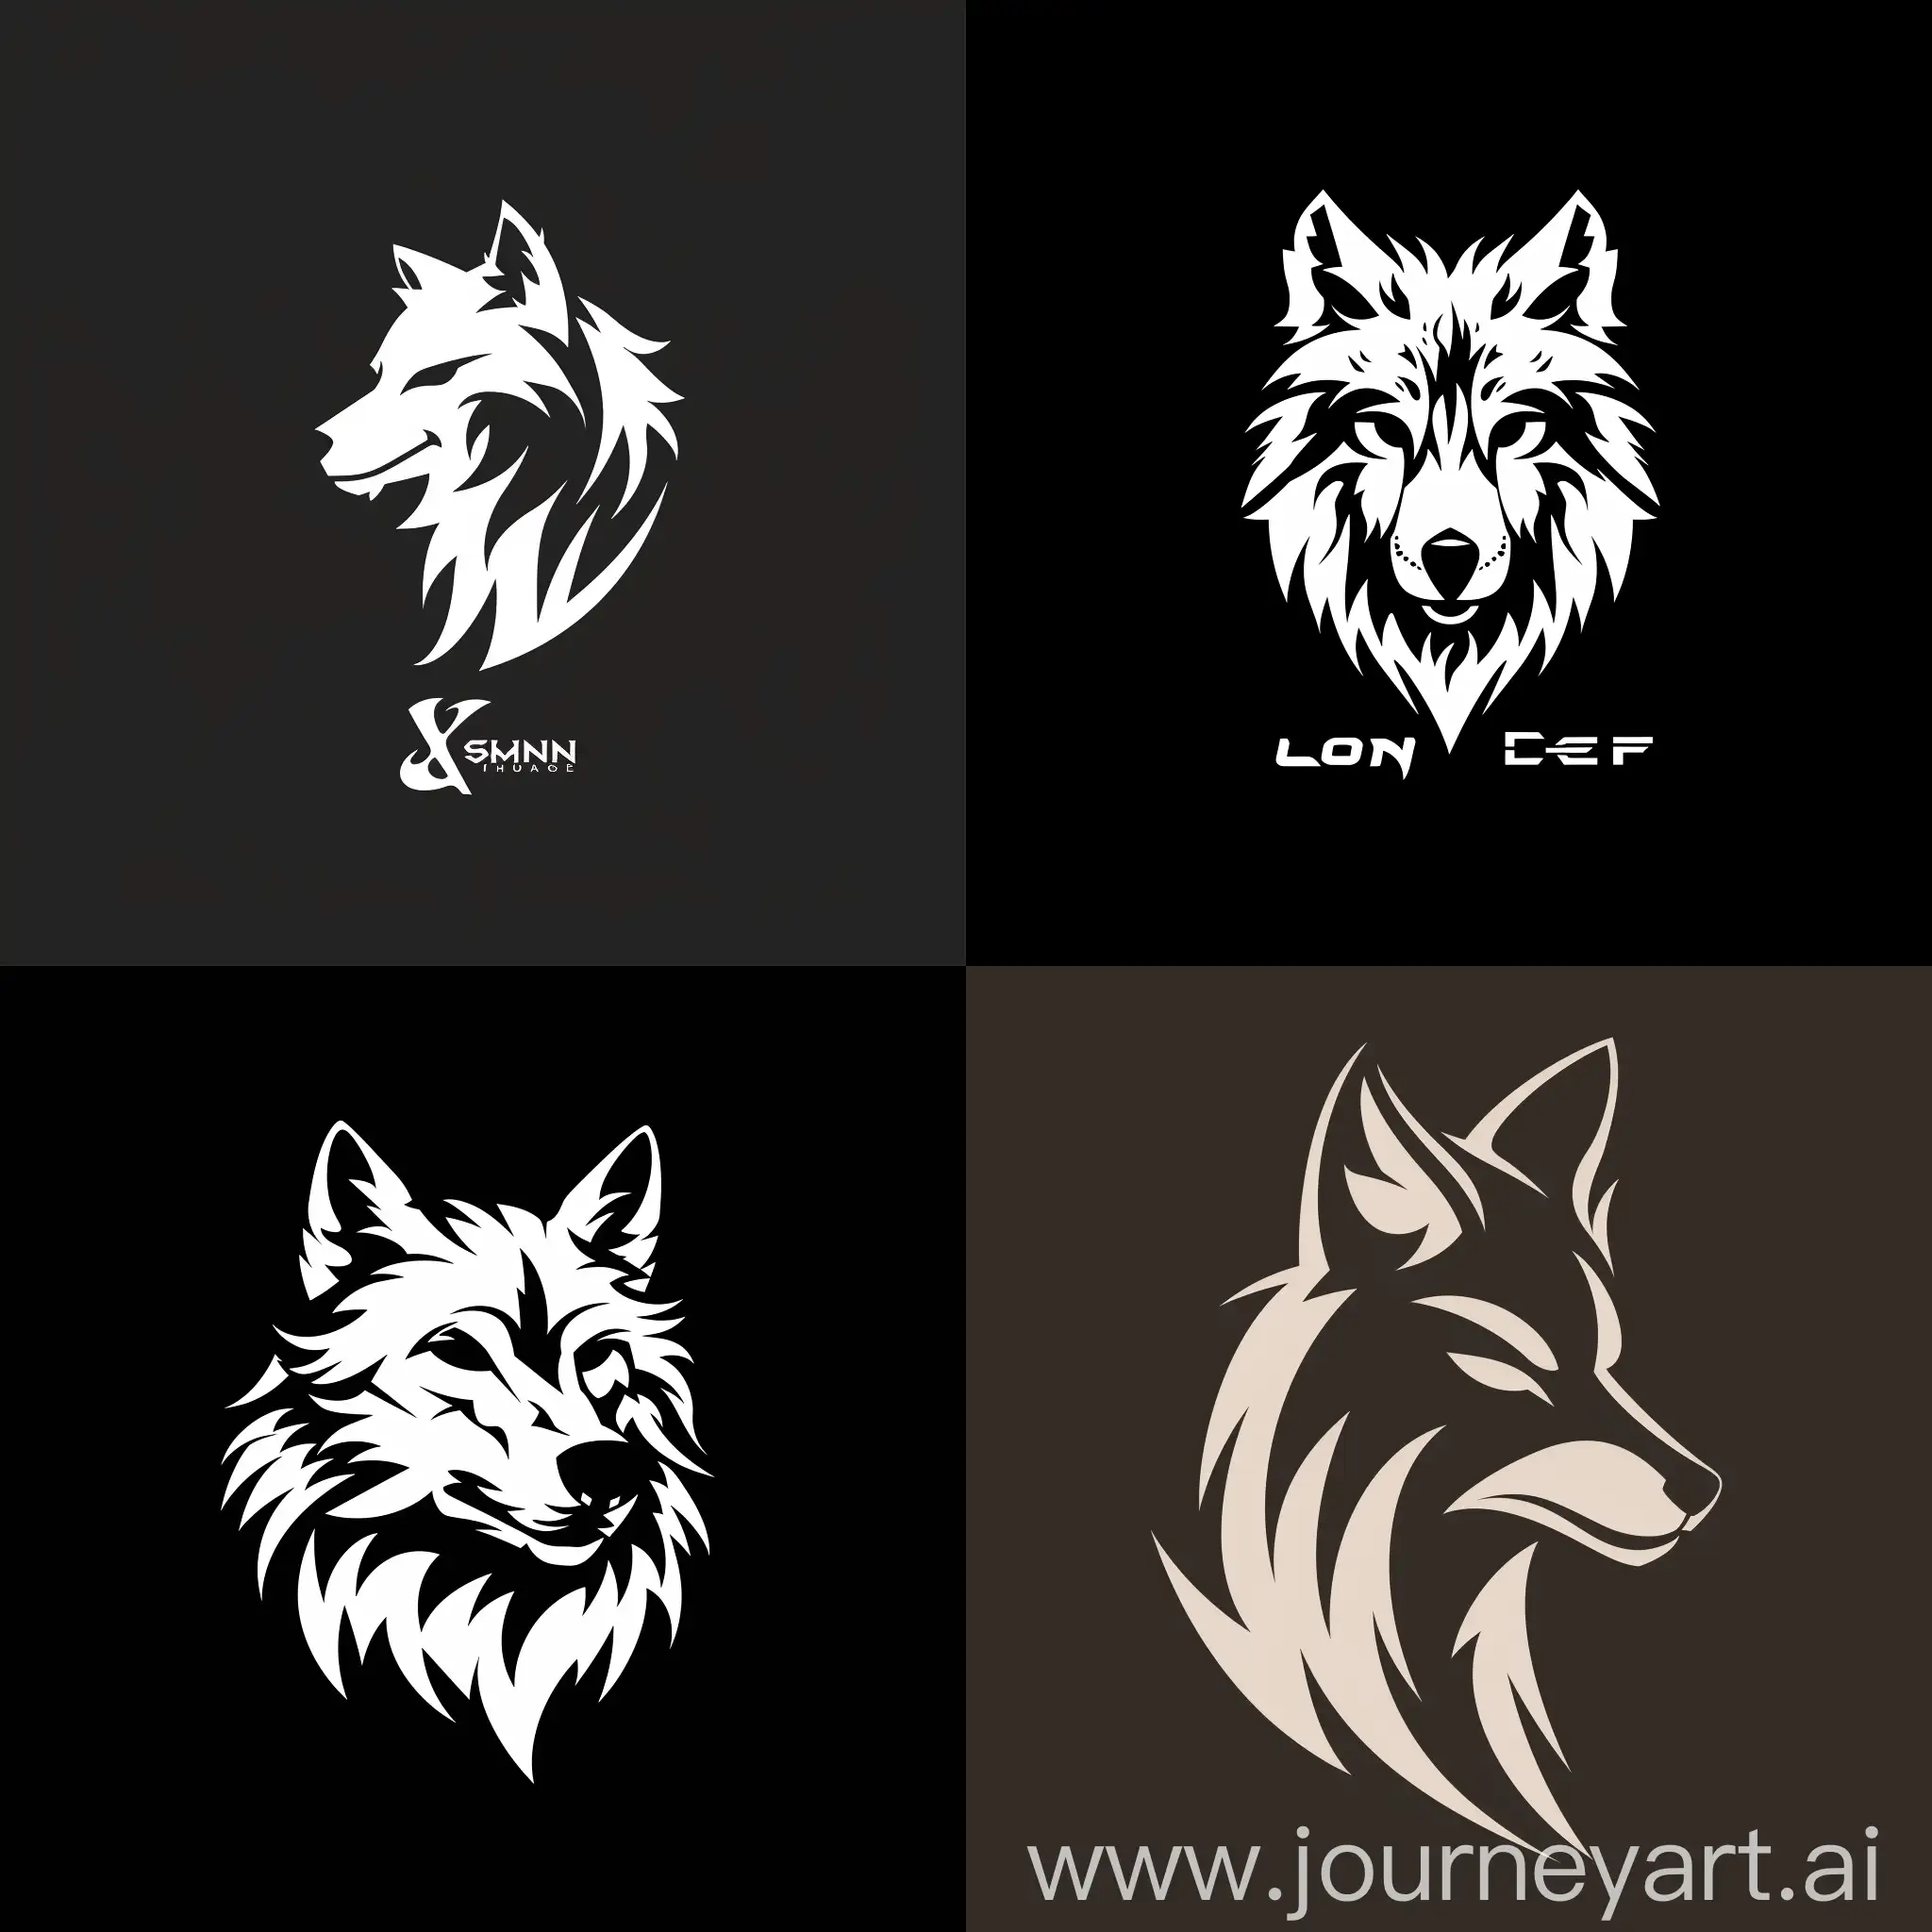 Create a logo for a company that focuses on serving Sigma men. The logo must be based on a lone wolf, strong and not childish. It should also be minimalist.